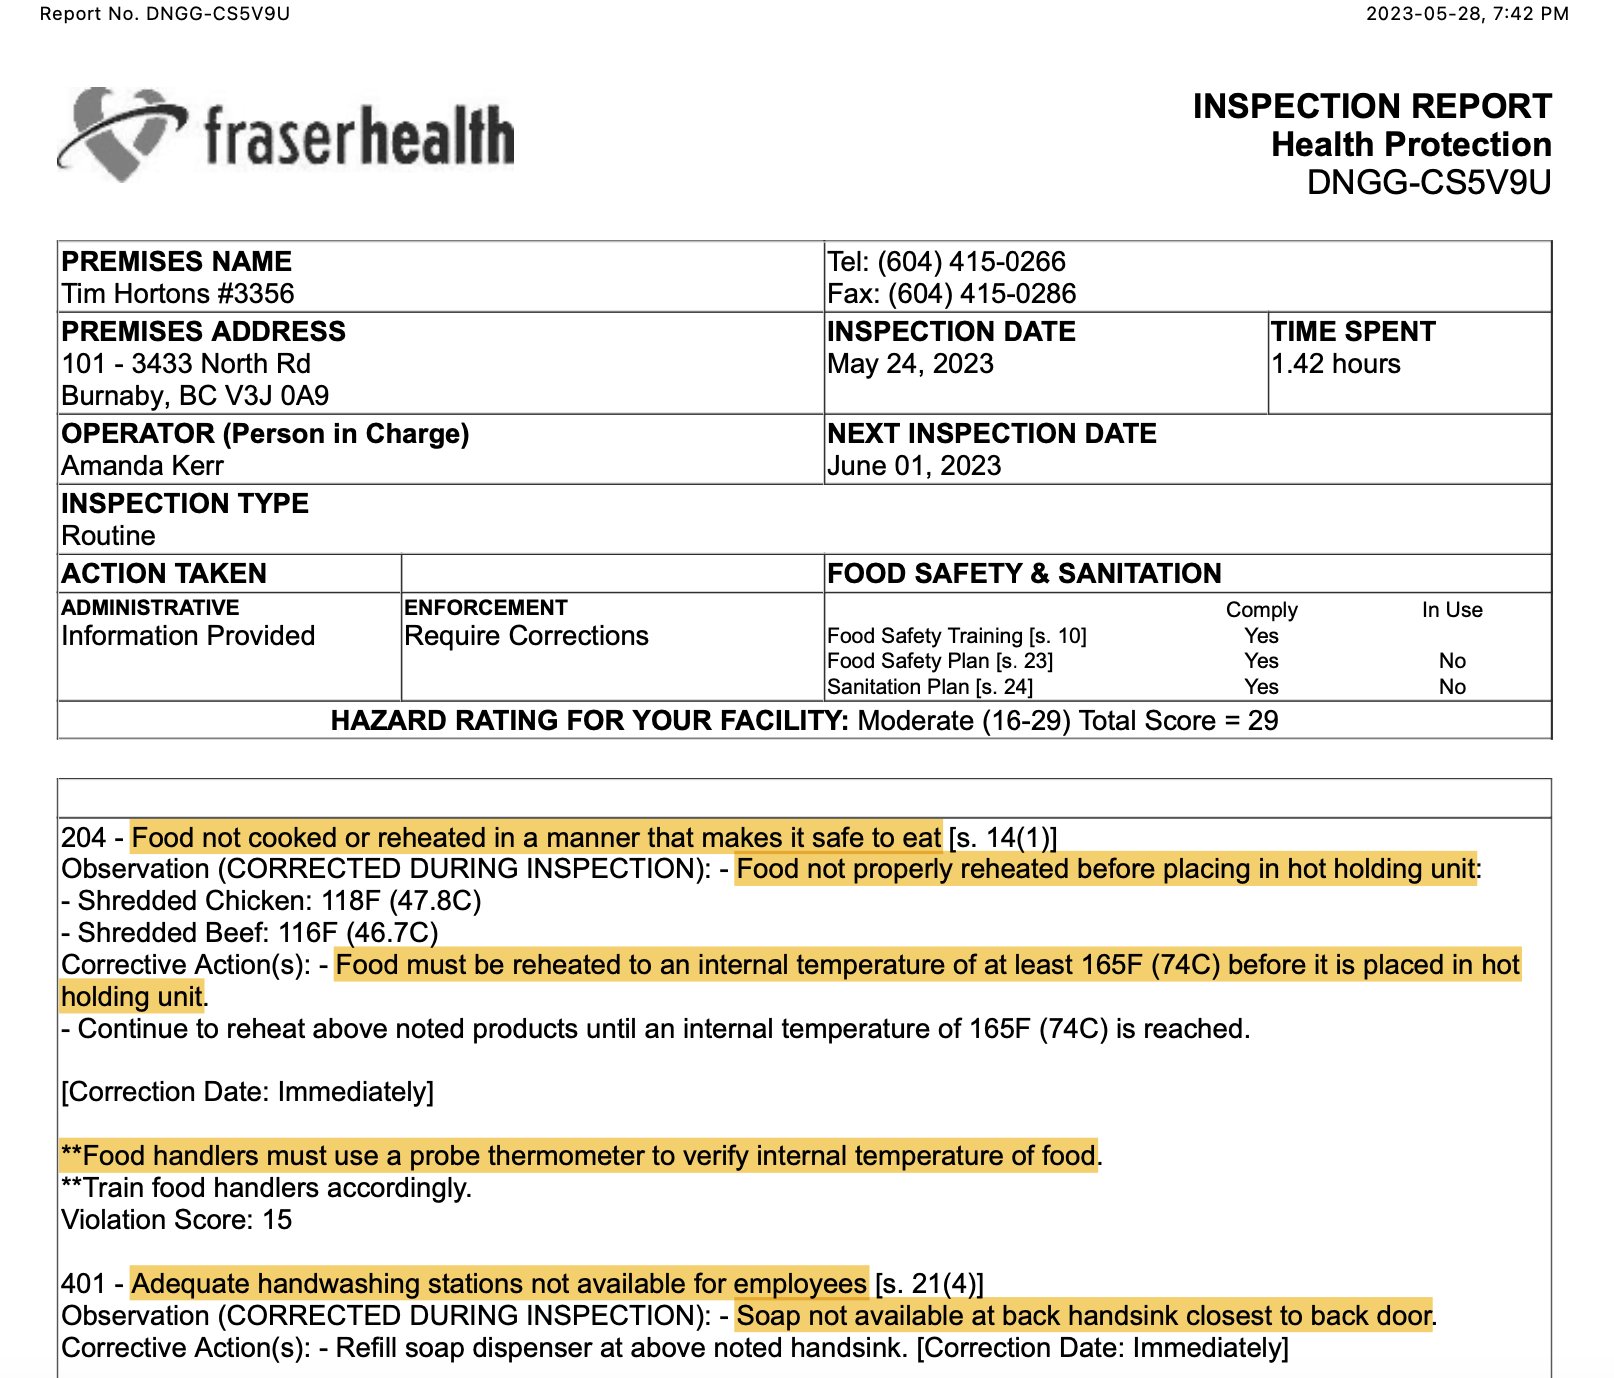 Fraser Health inspection report, page 1